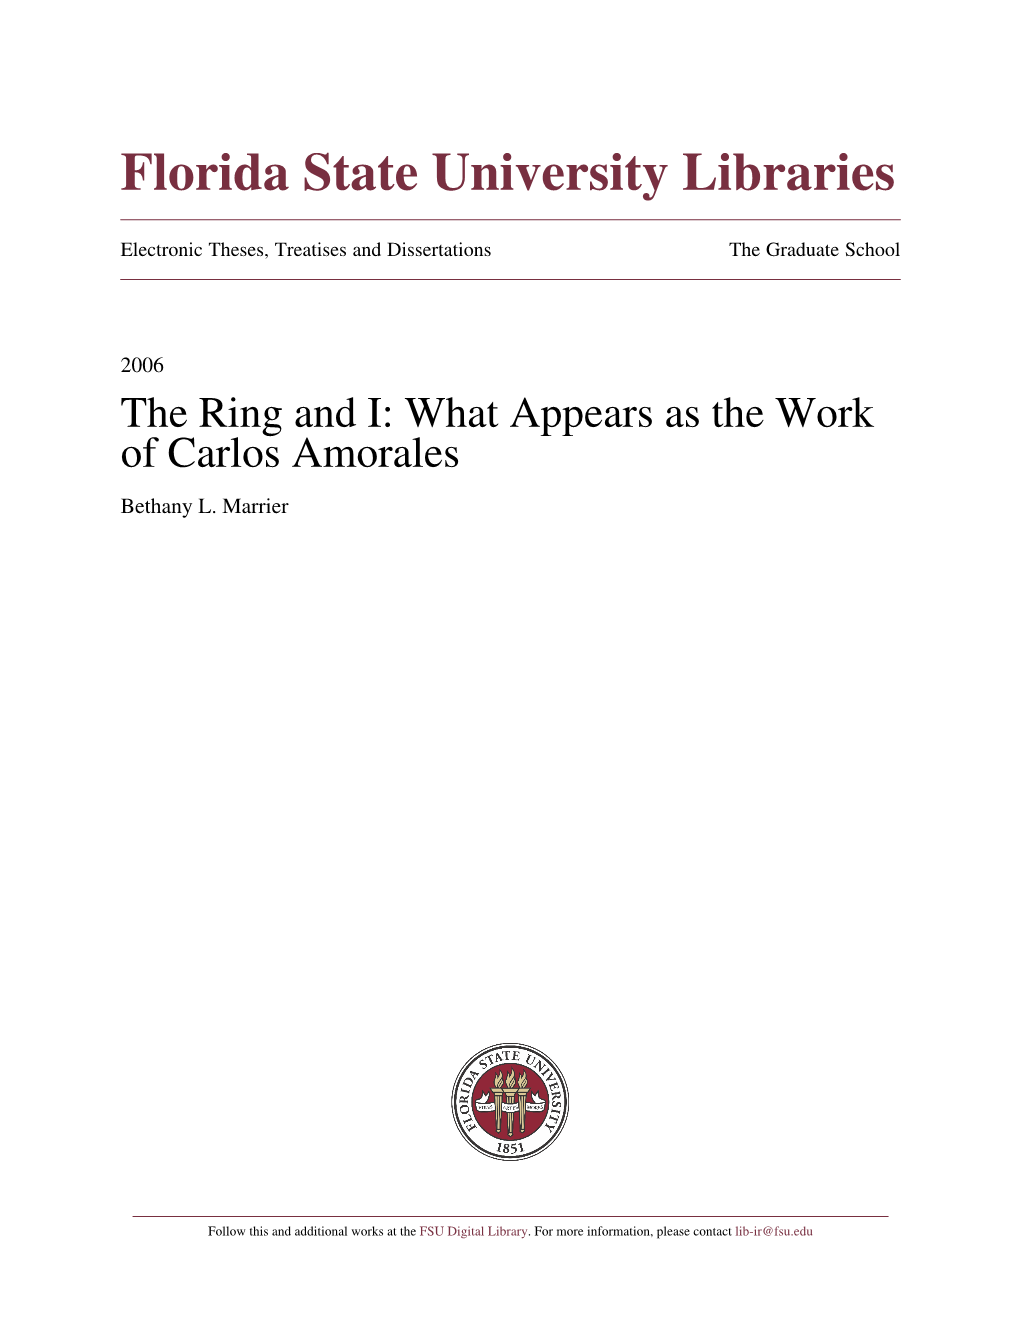 The Ring and I: What Appears As the Work of Carlos Amorales Bethany L